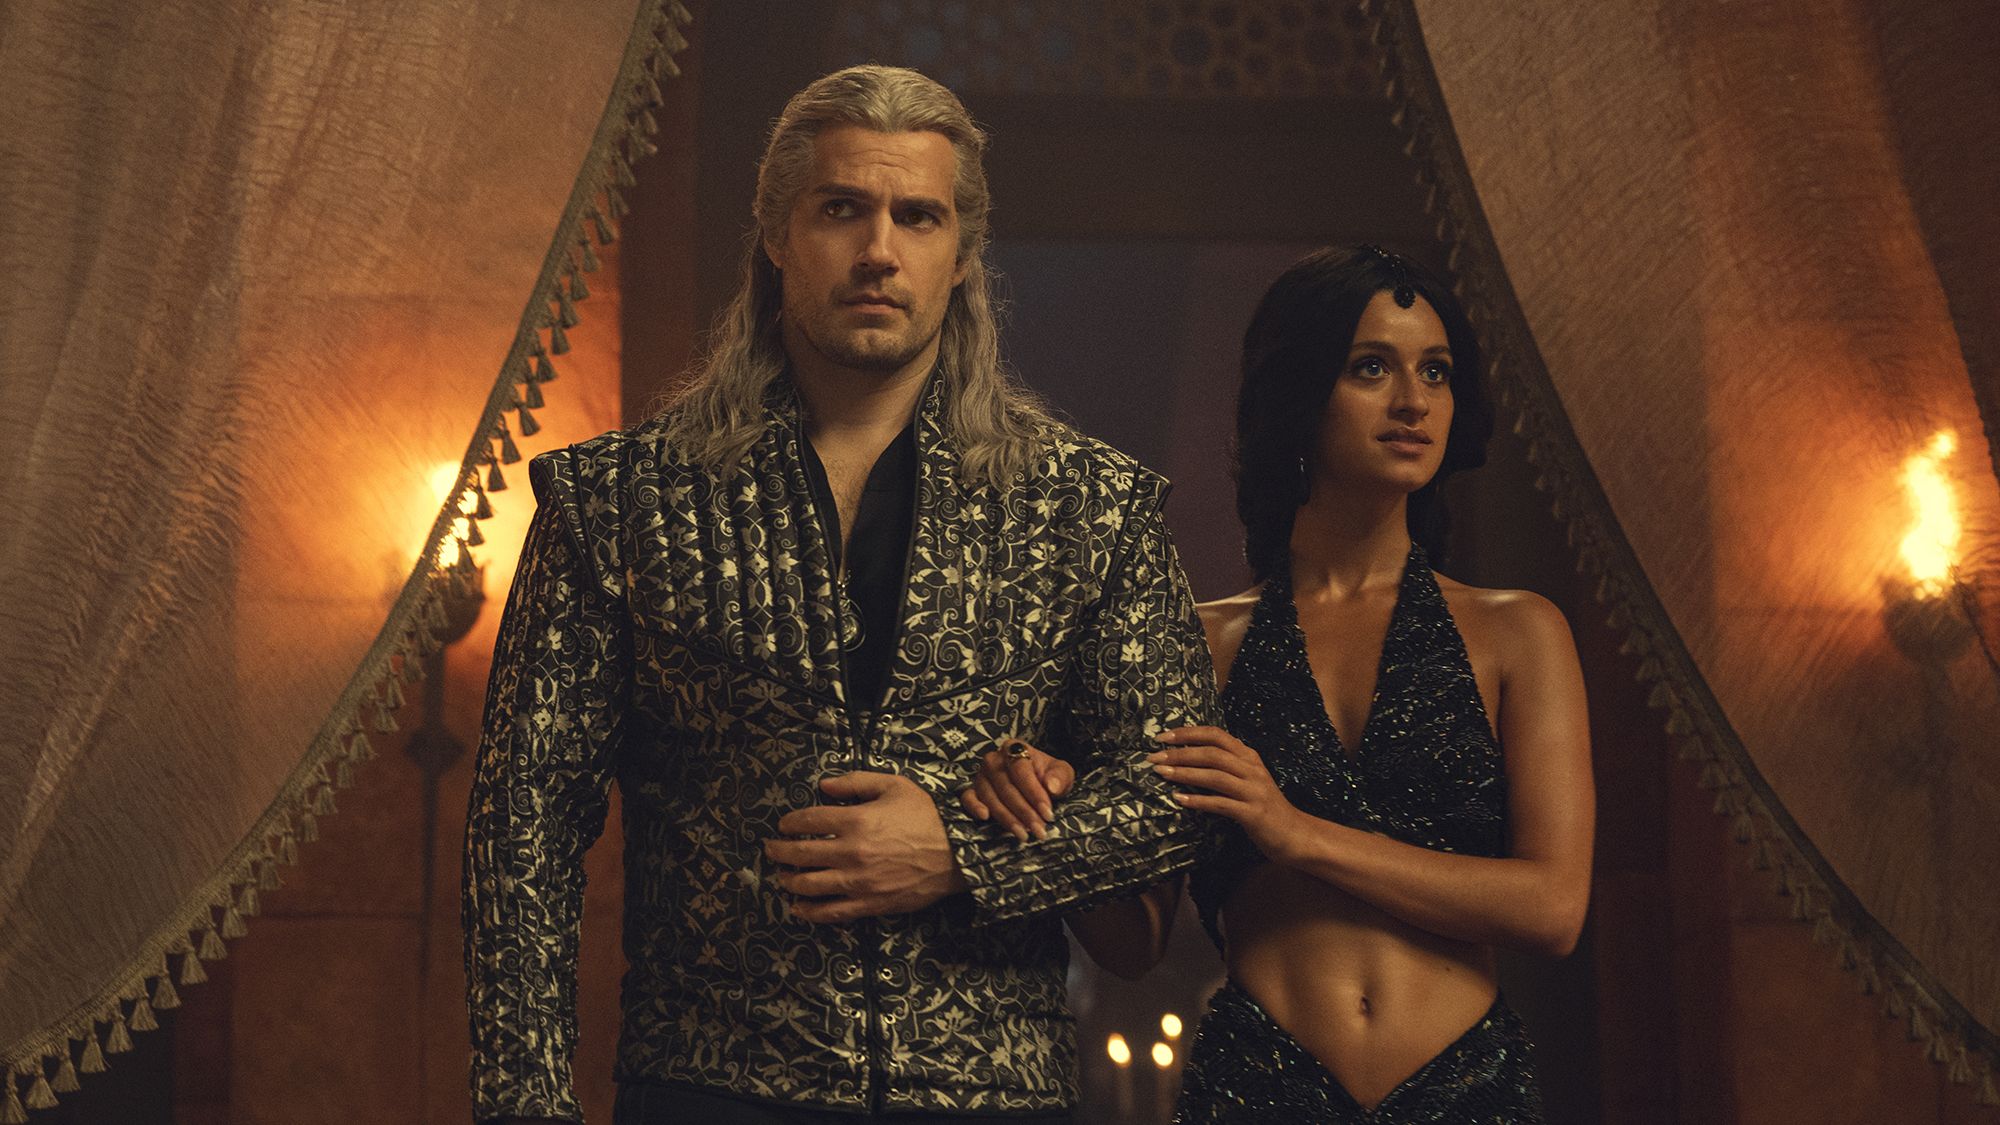 colby shore recommends The Witcher Nude Scenes